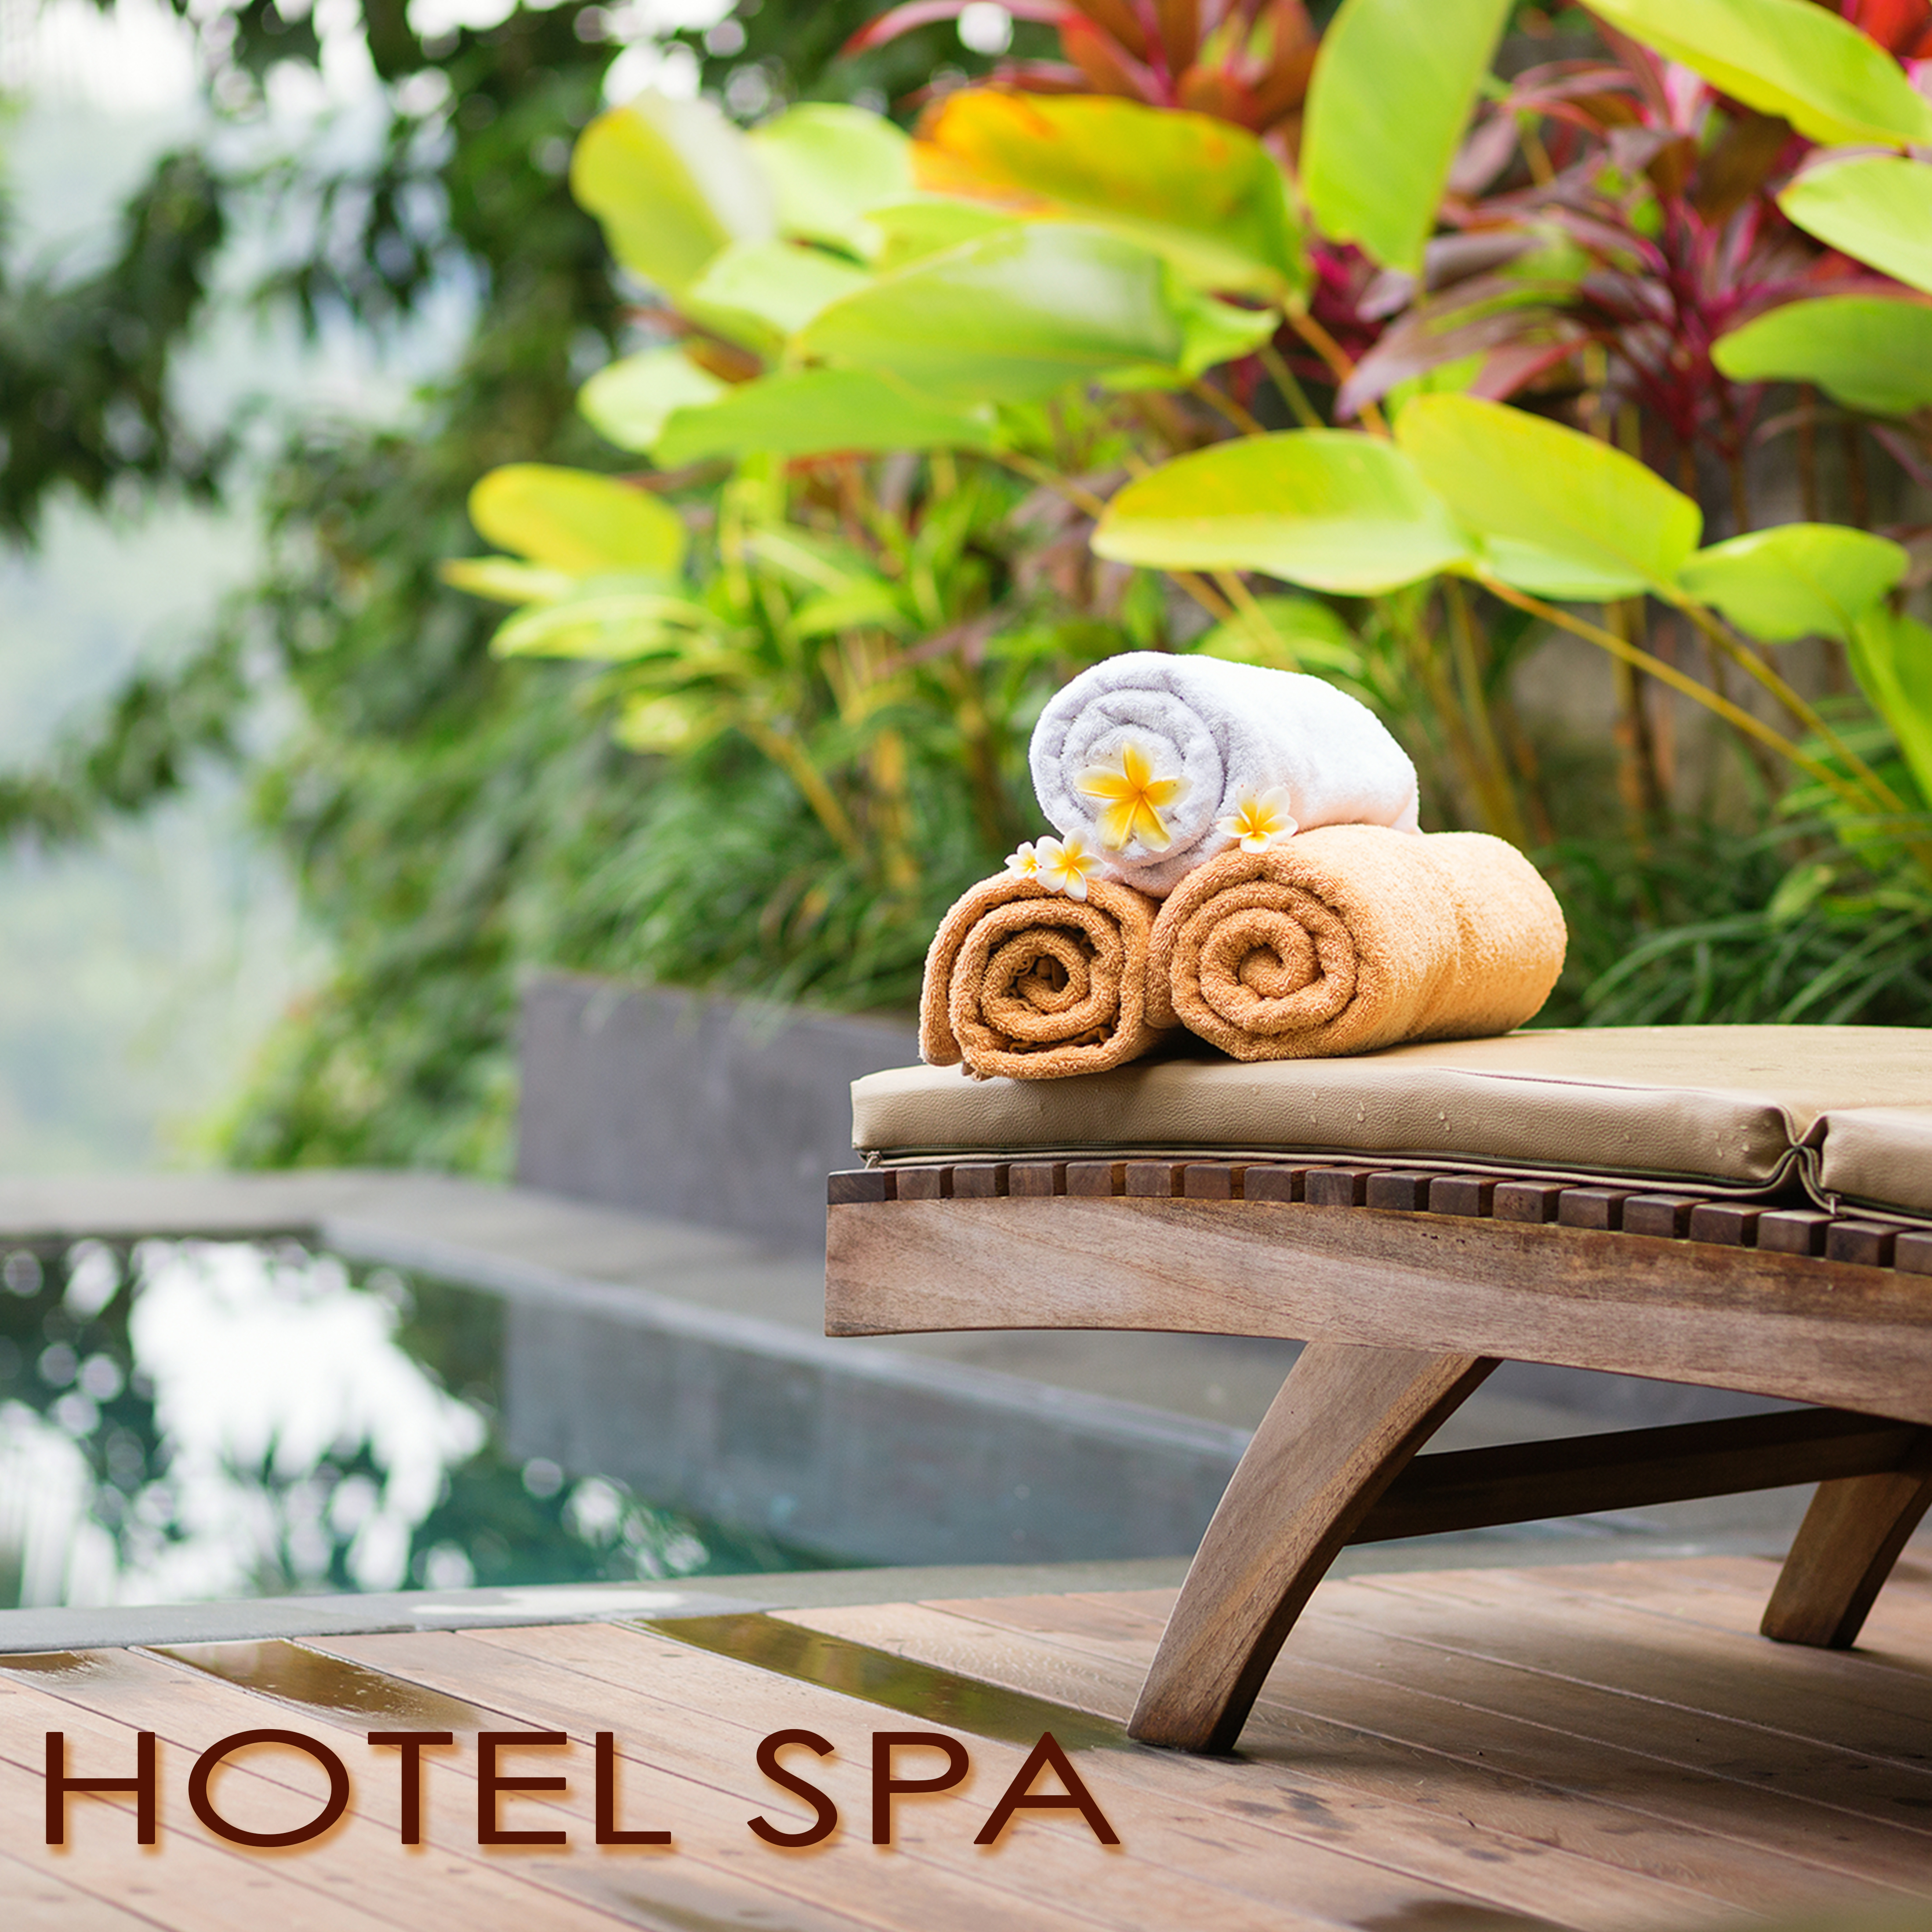 Hotel Spa  Soothing Spa Music for Massage, Spa Treatments, Sauna  Beauty Treatments in Wellness Center